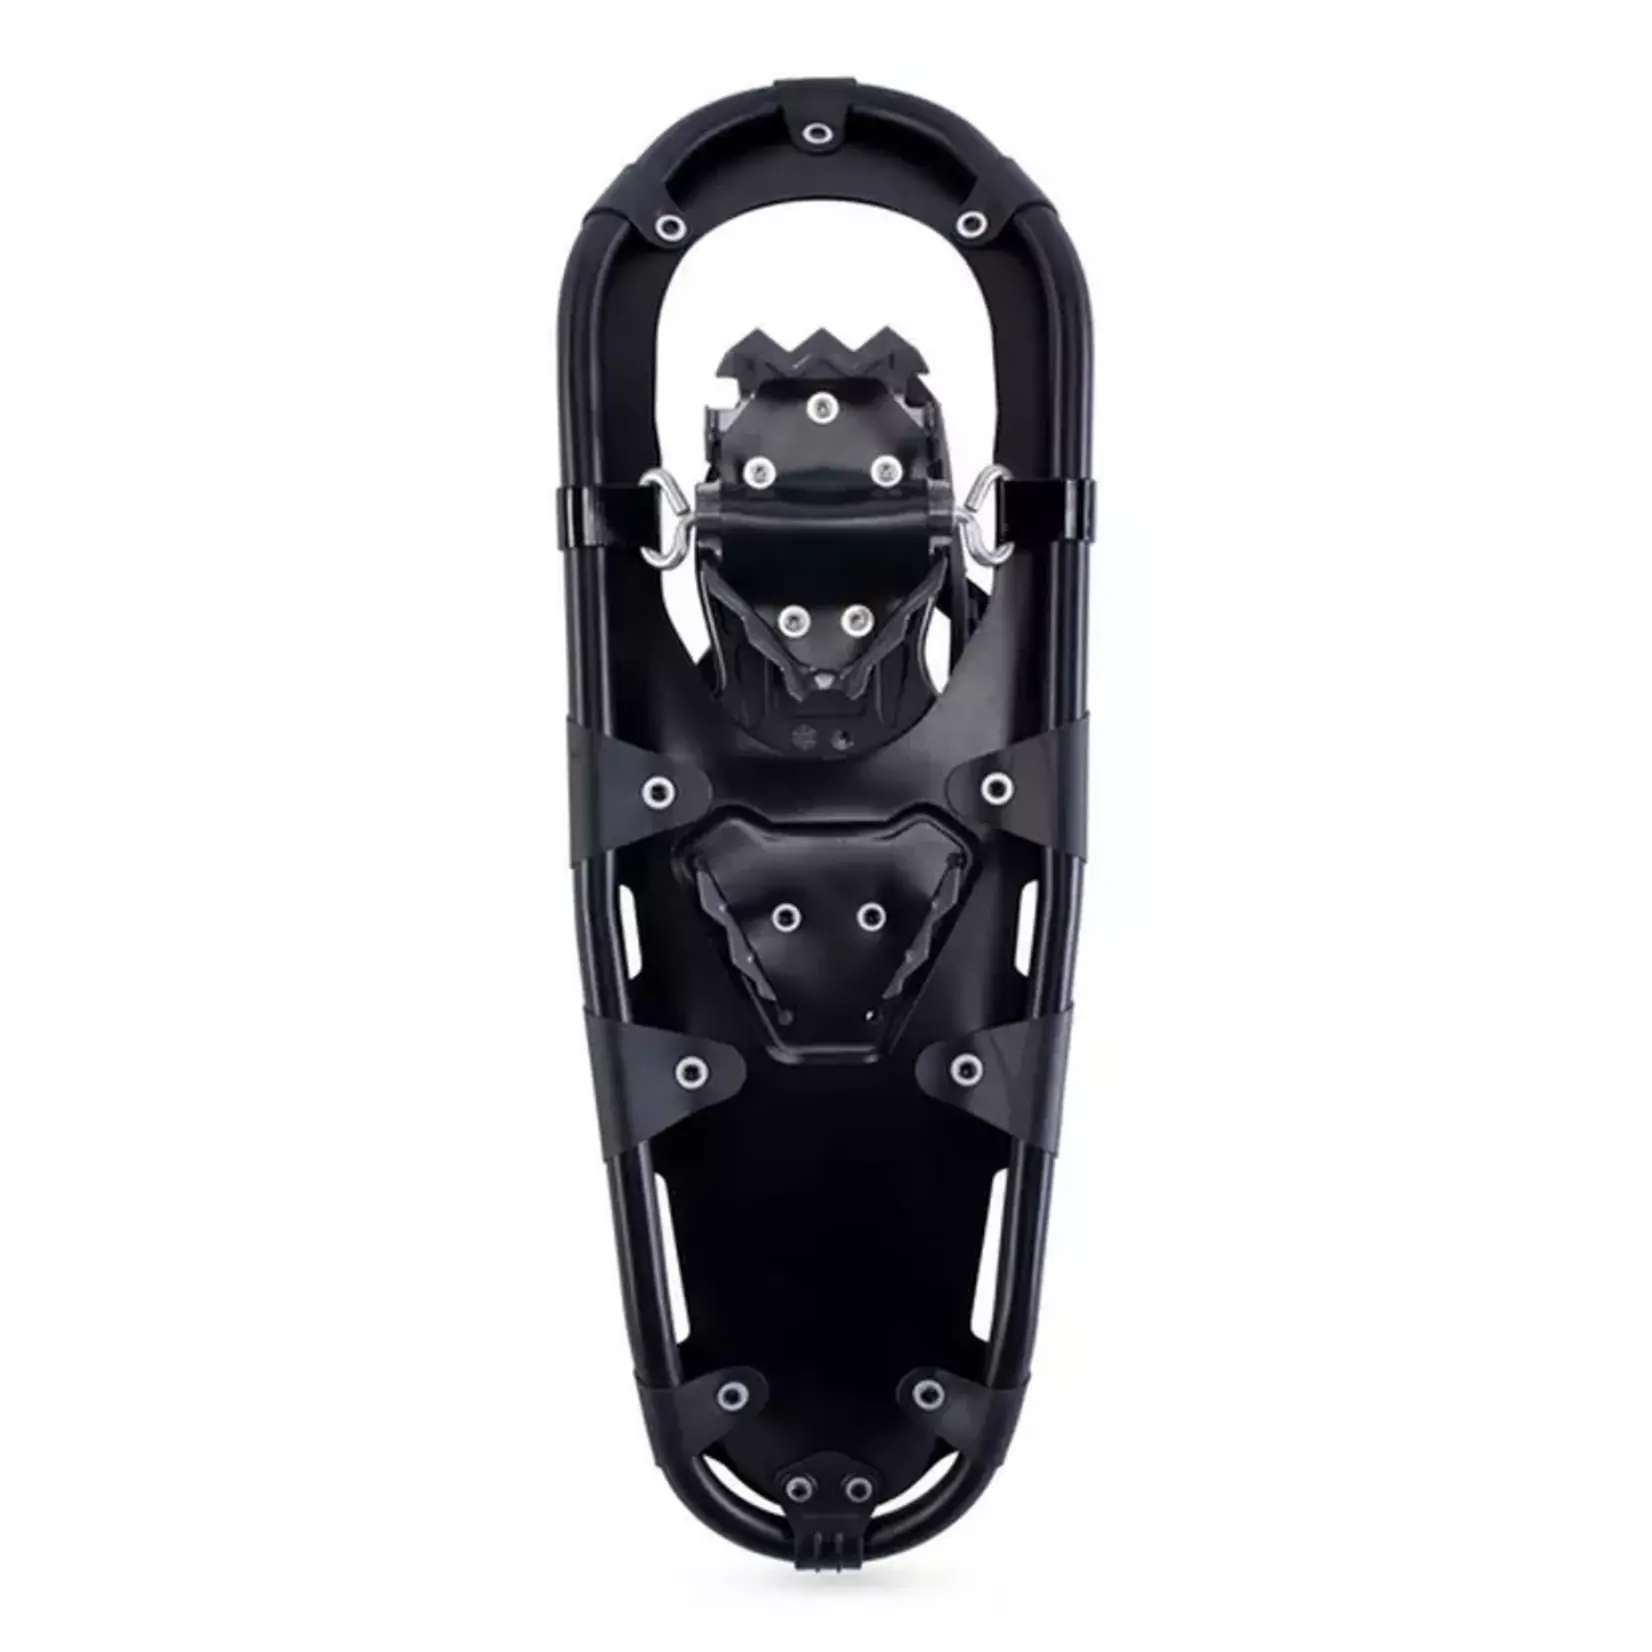 Tubbs Frontier 30 Snowshoes